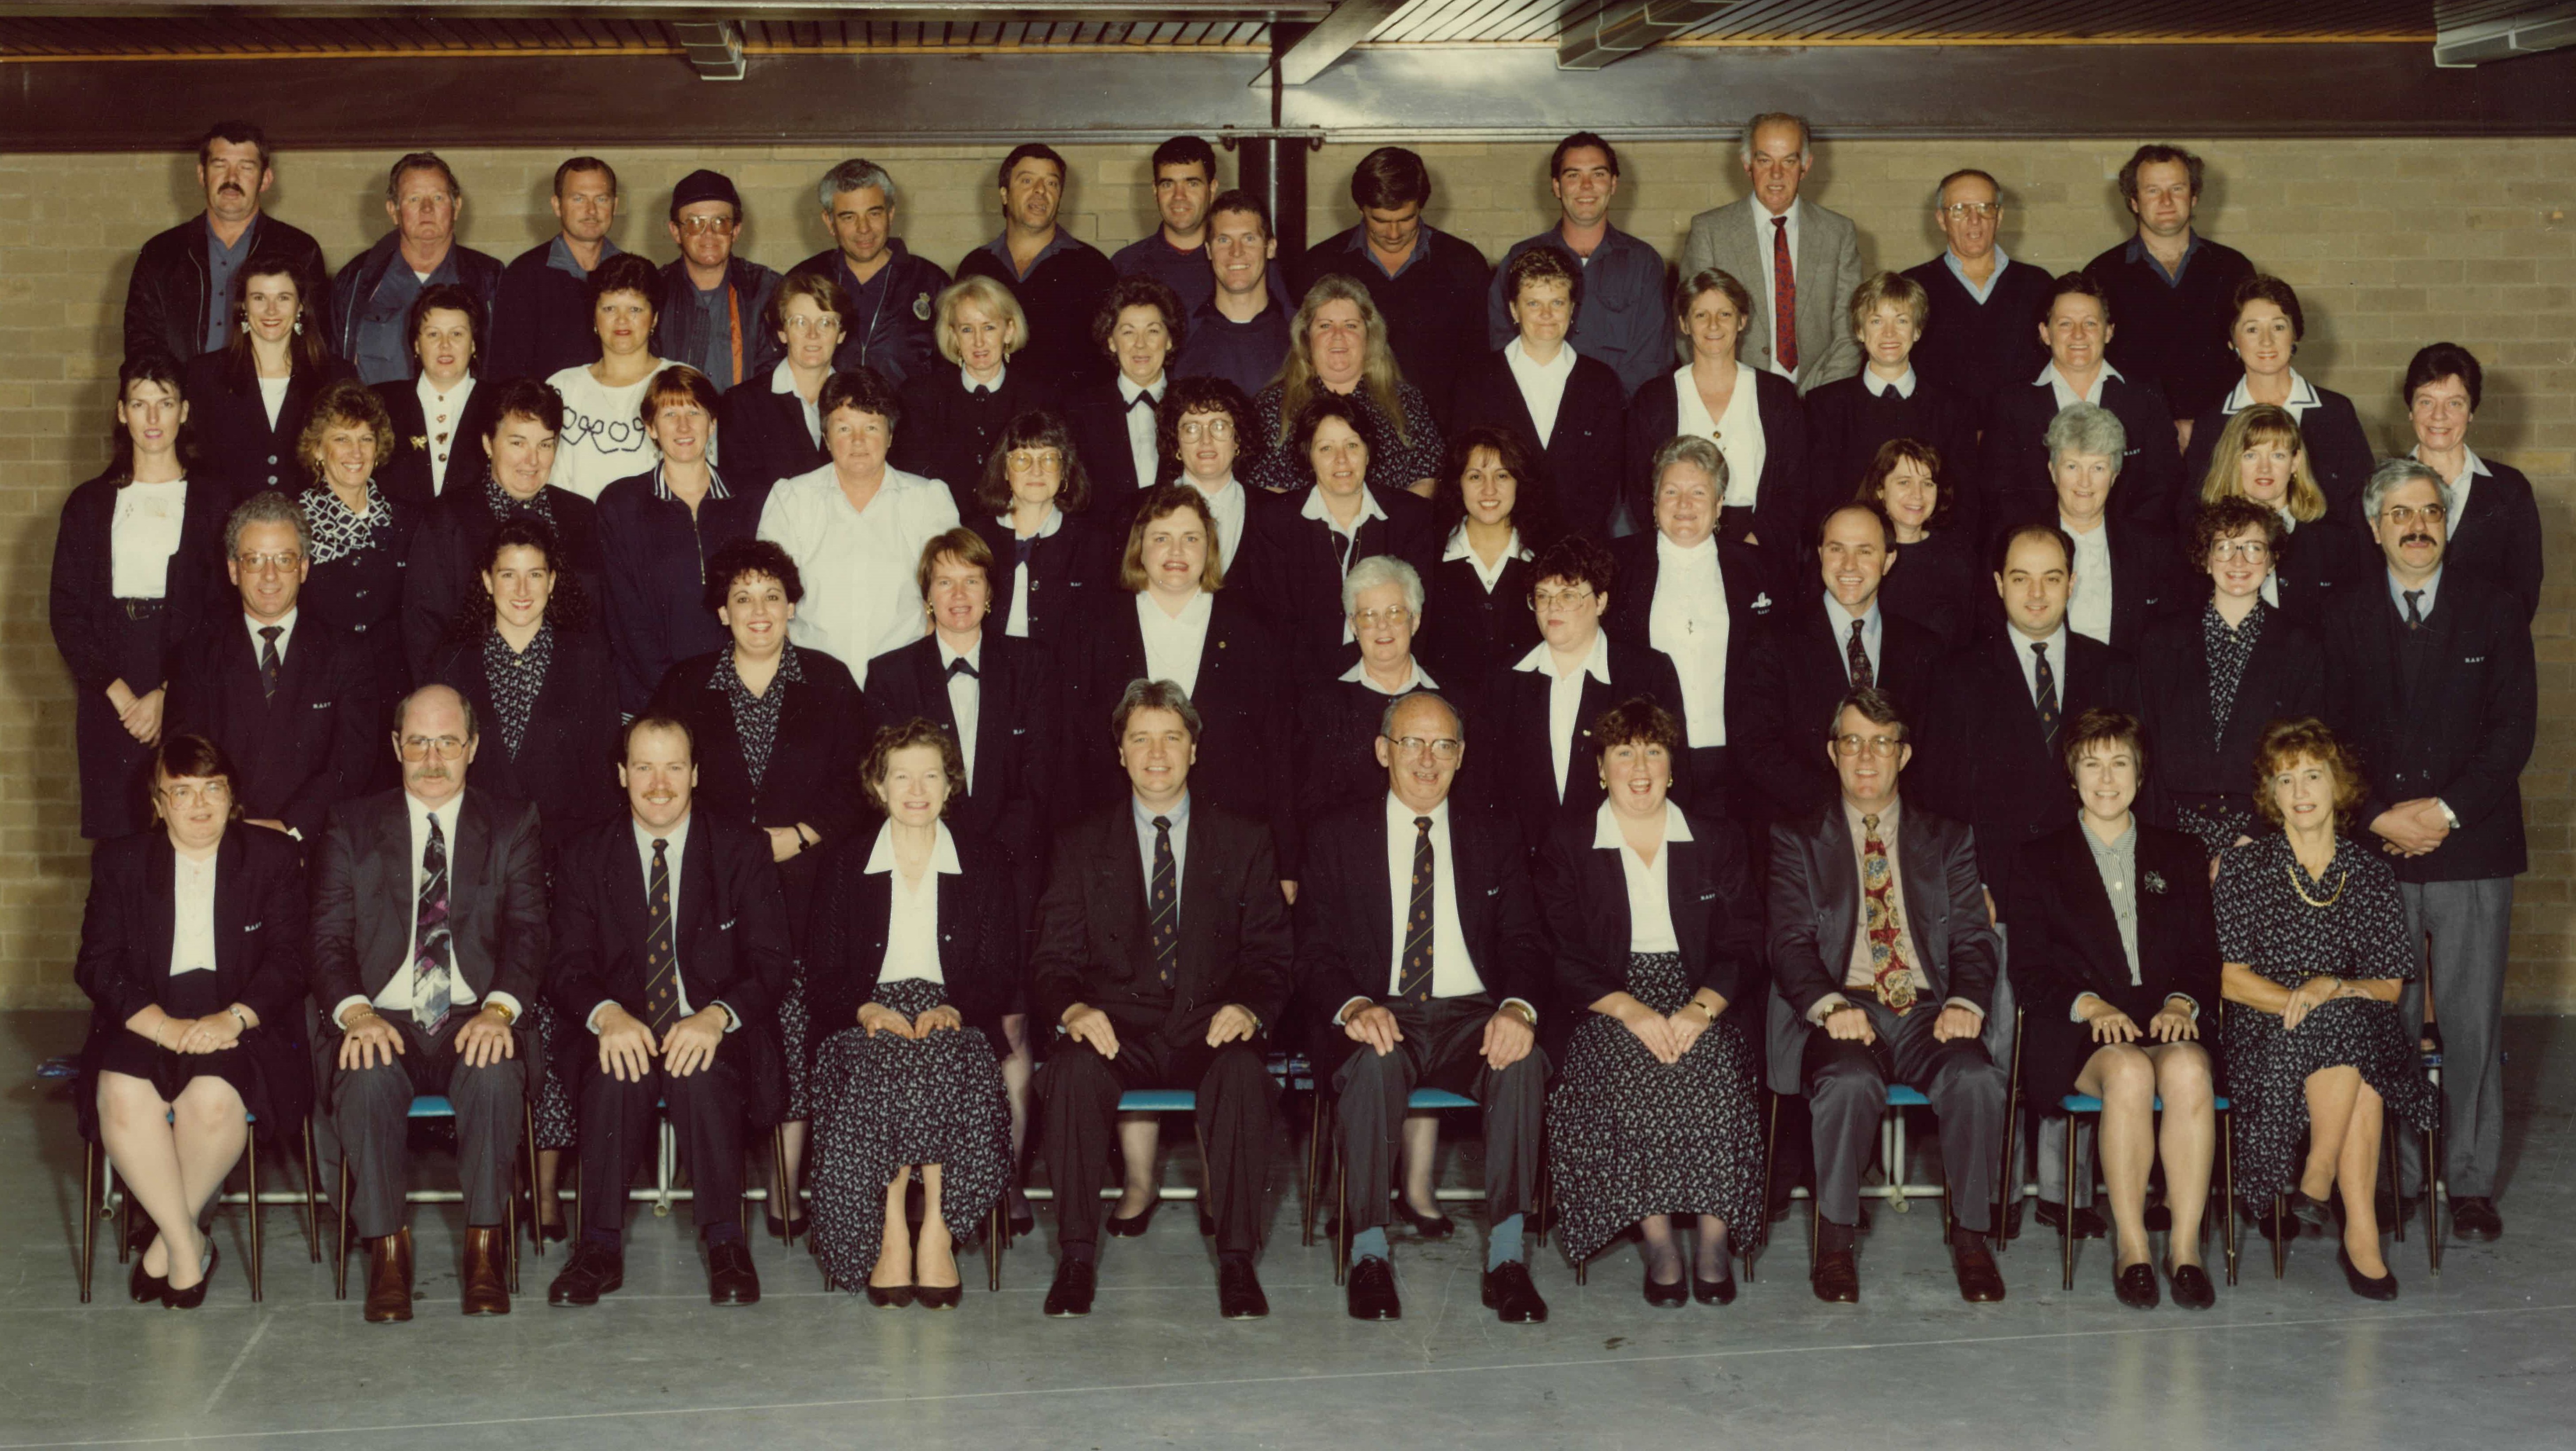 An official RASV staff photo, featuring Ms Nix in the fourth row back, second from the right.